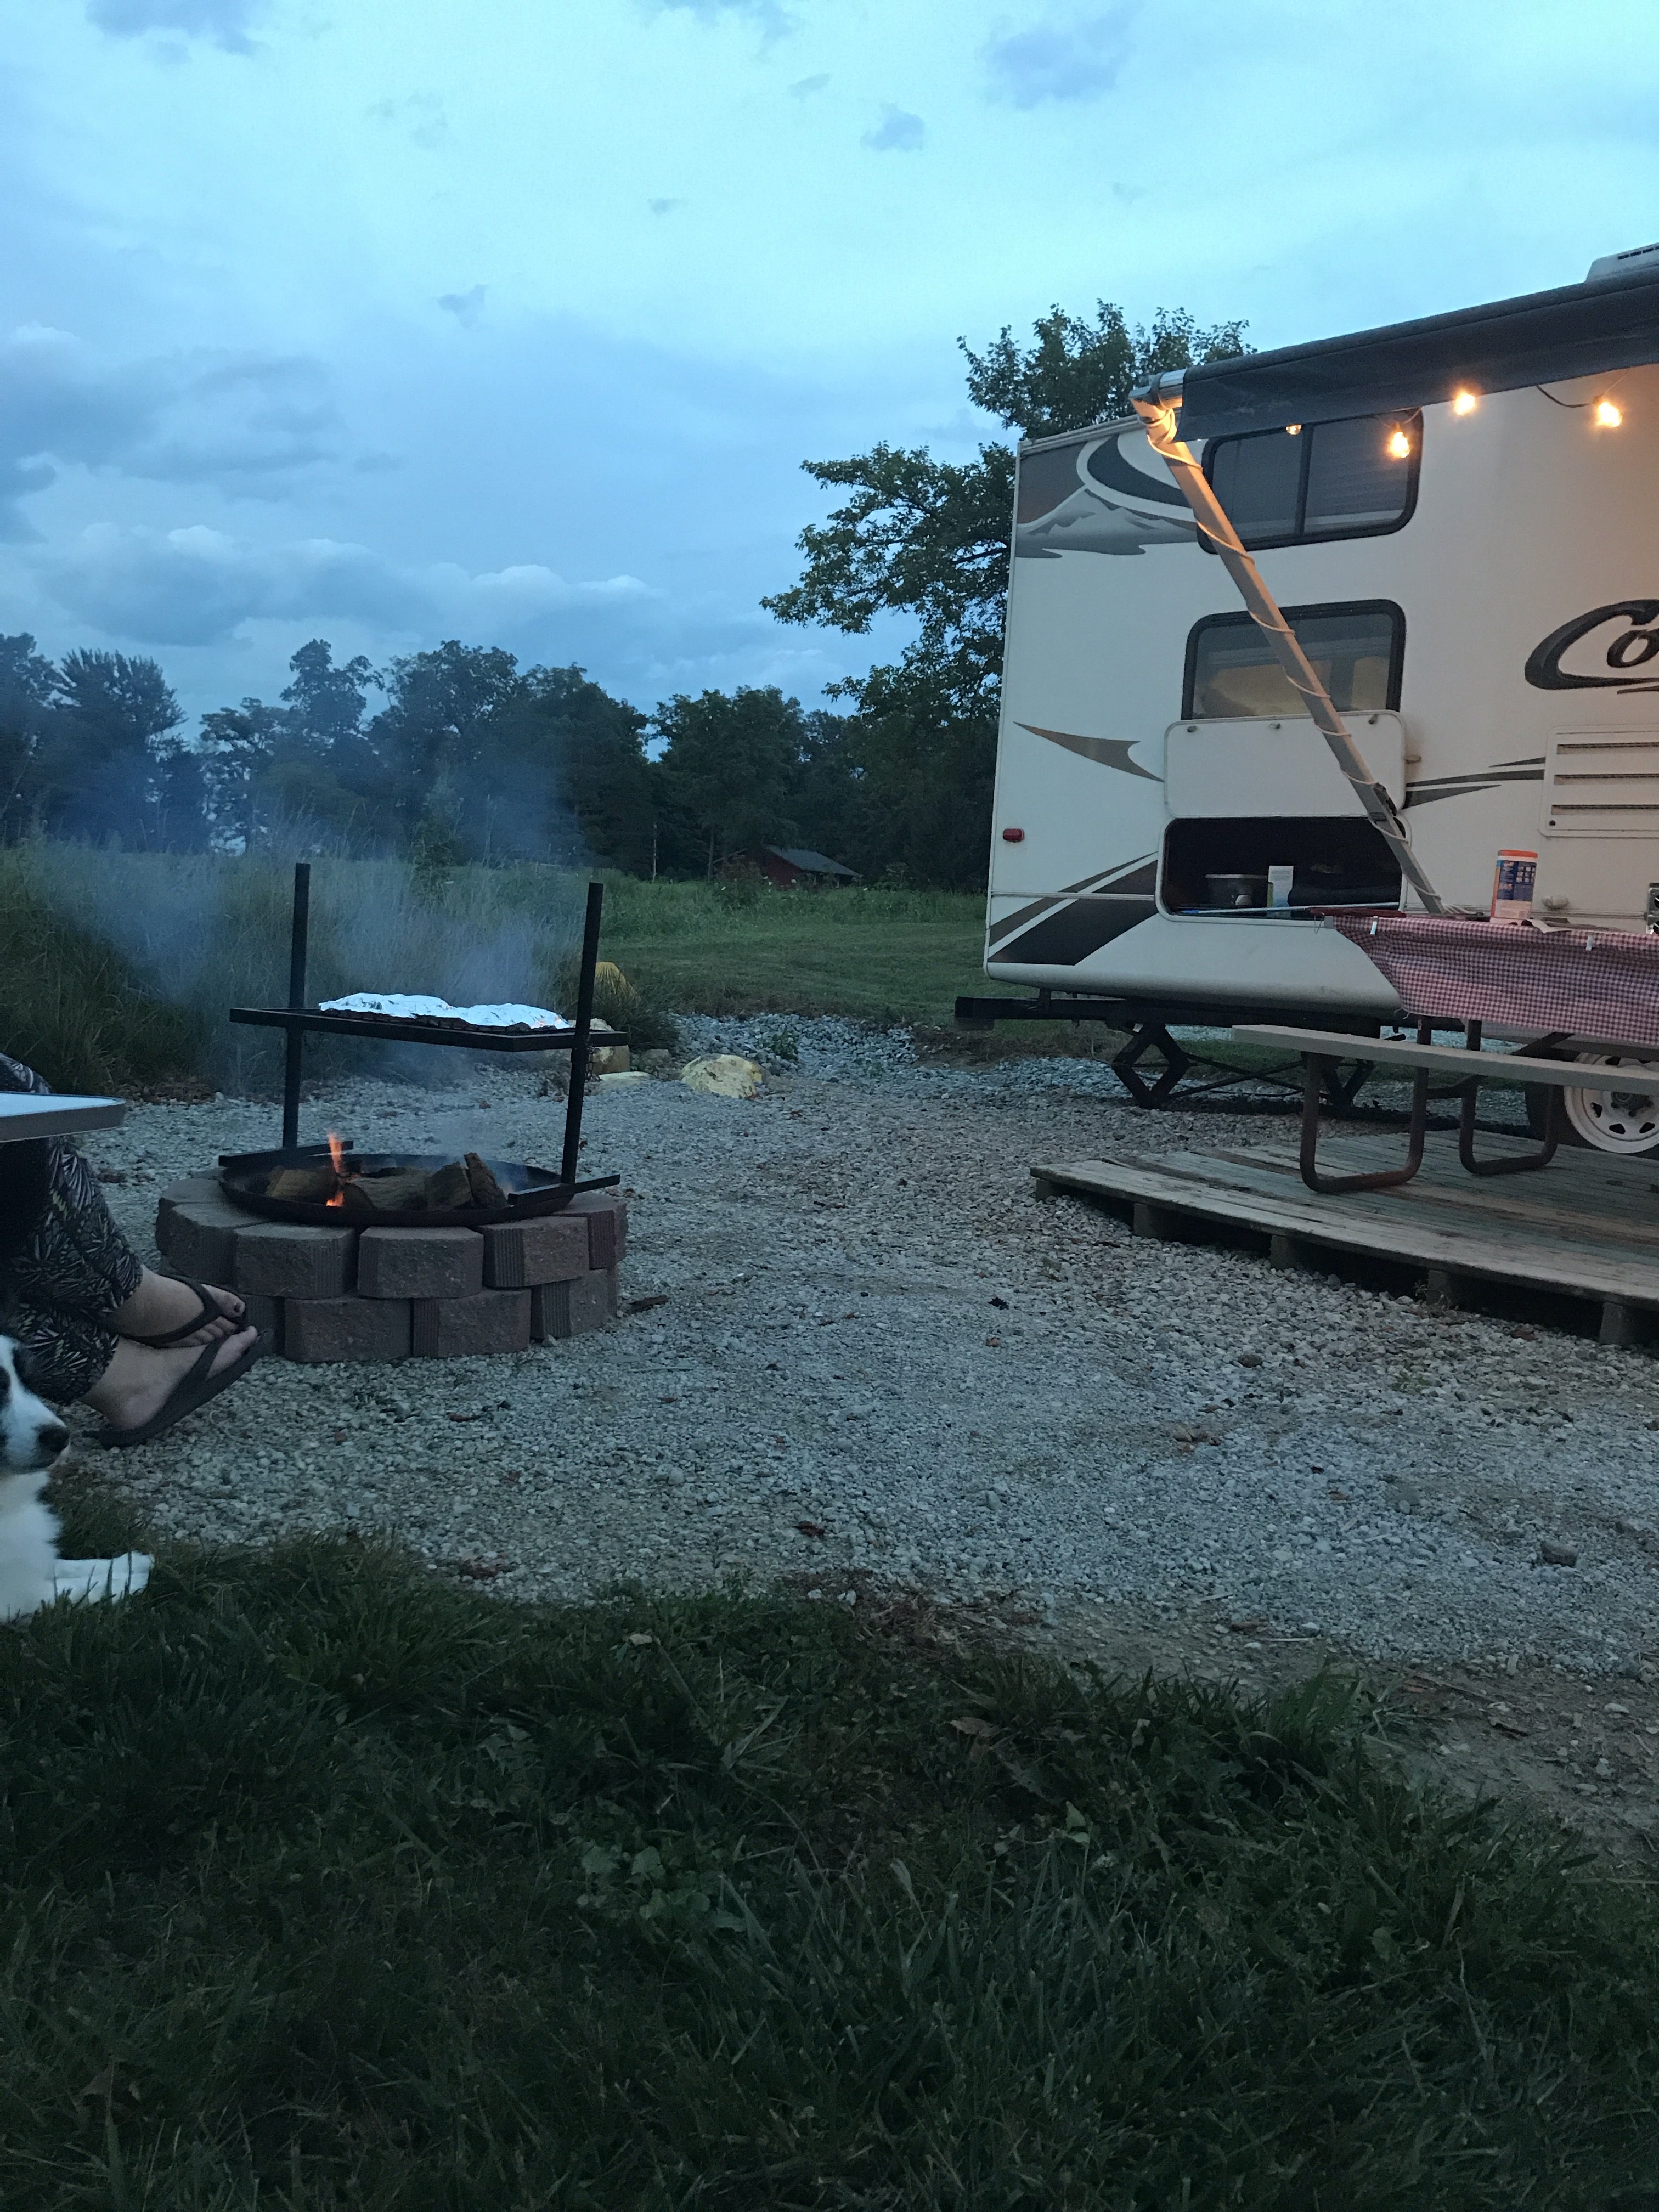 Cooking on the fire